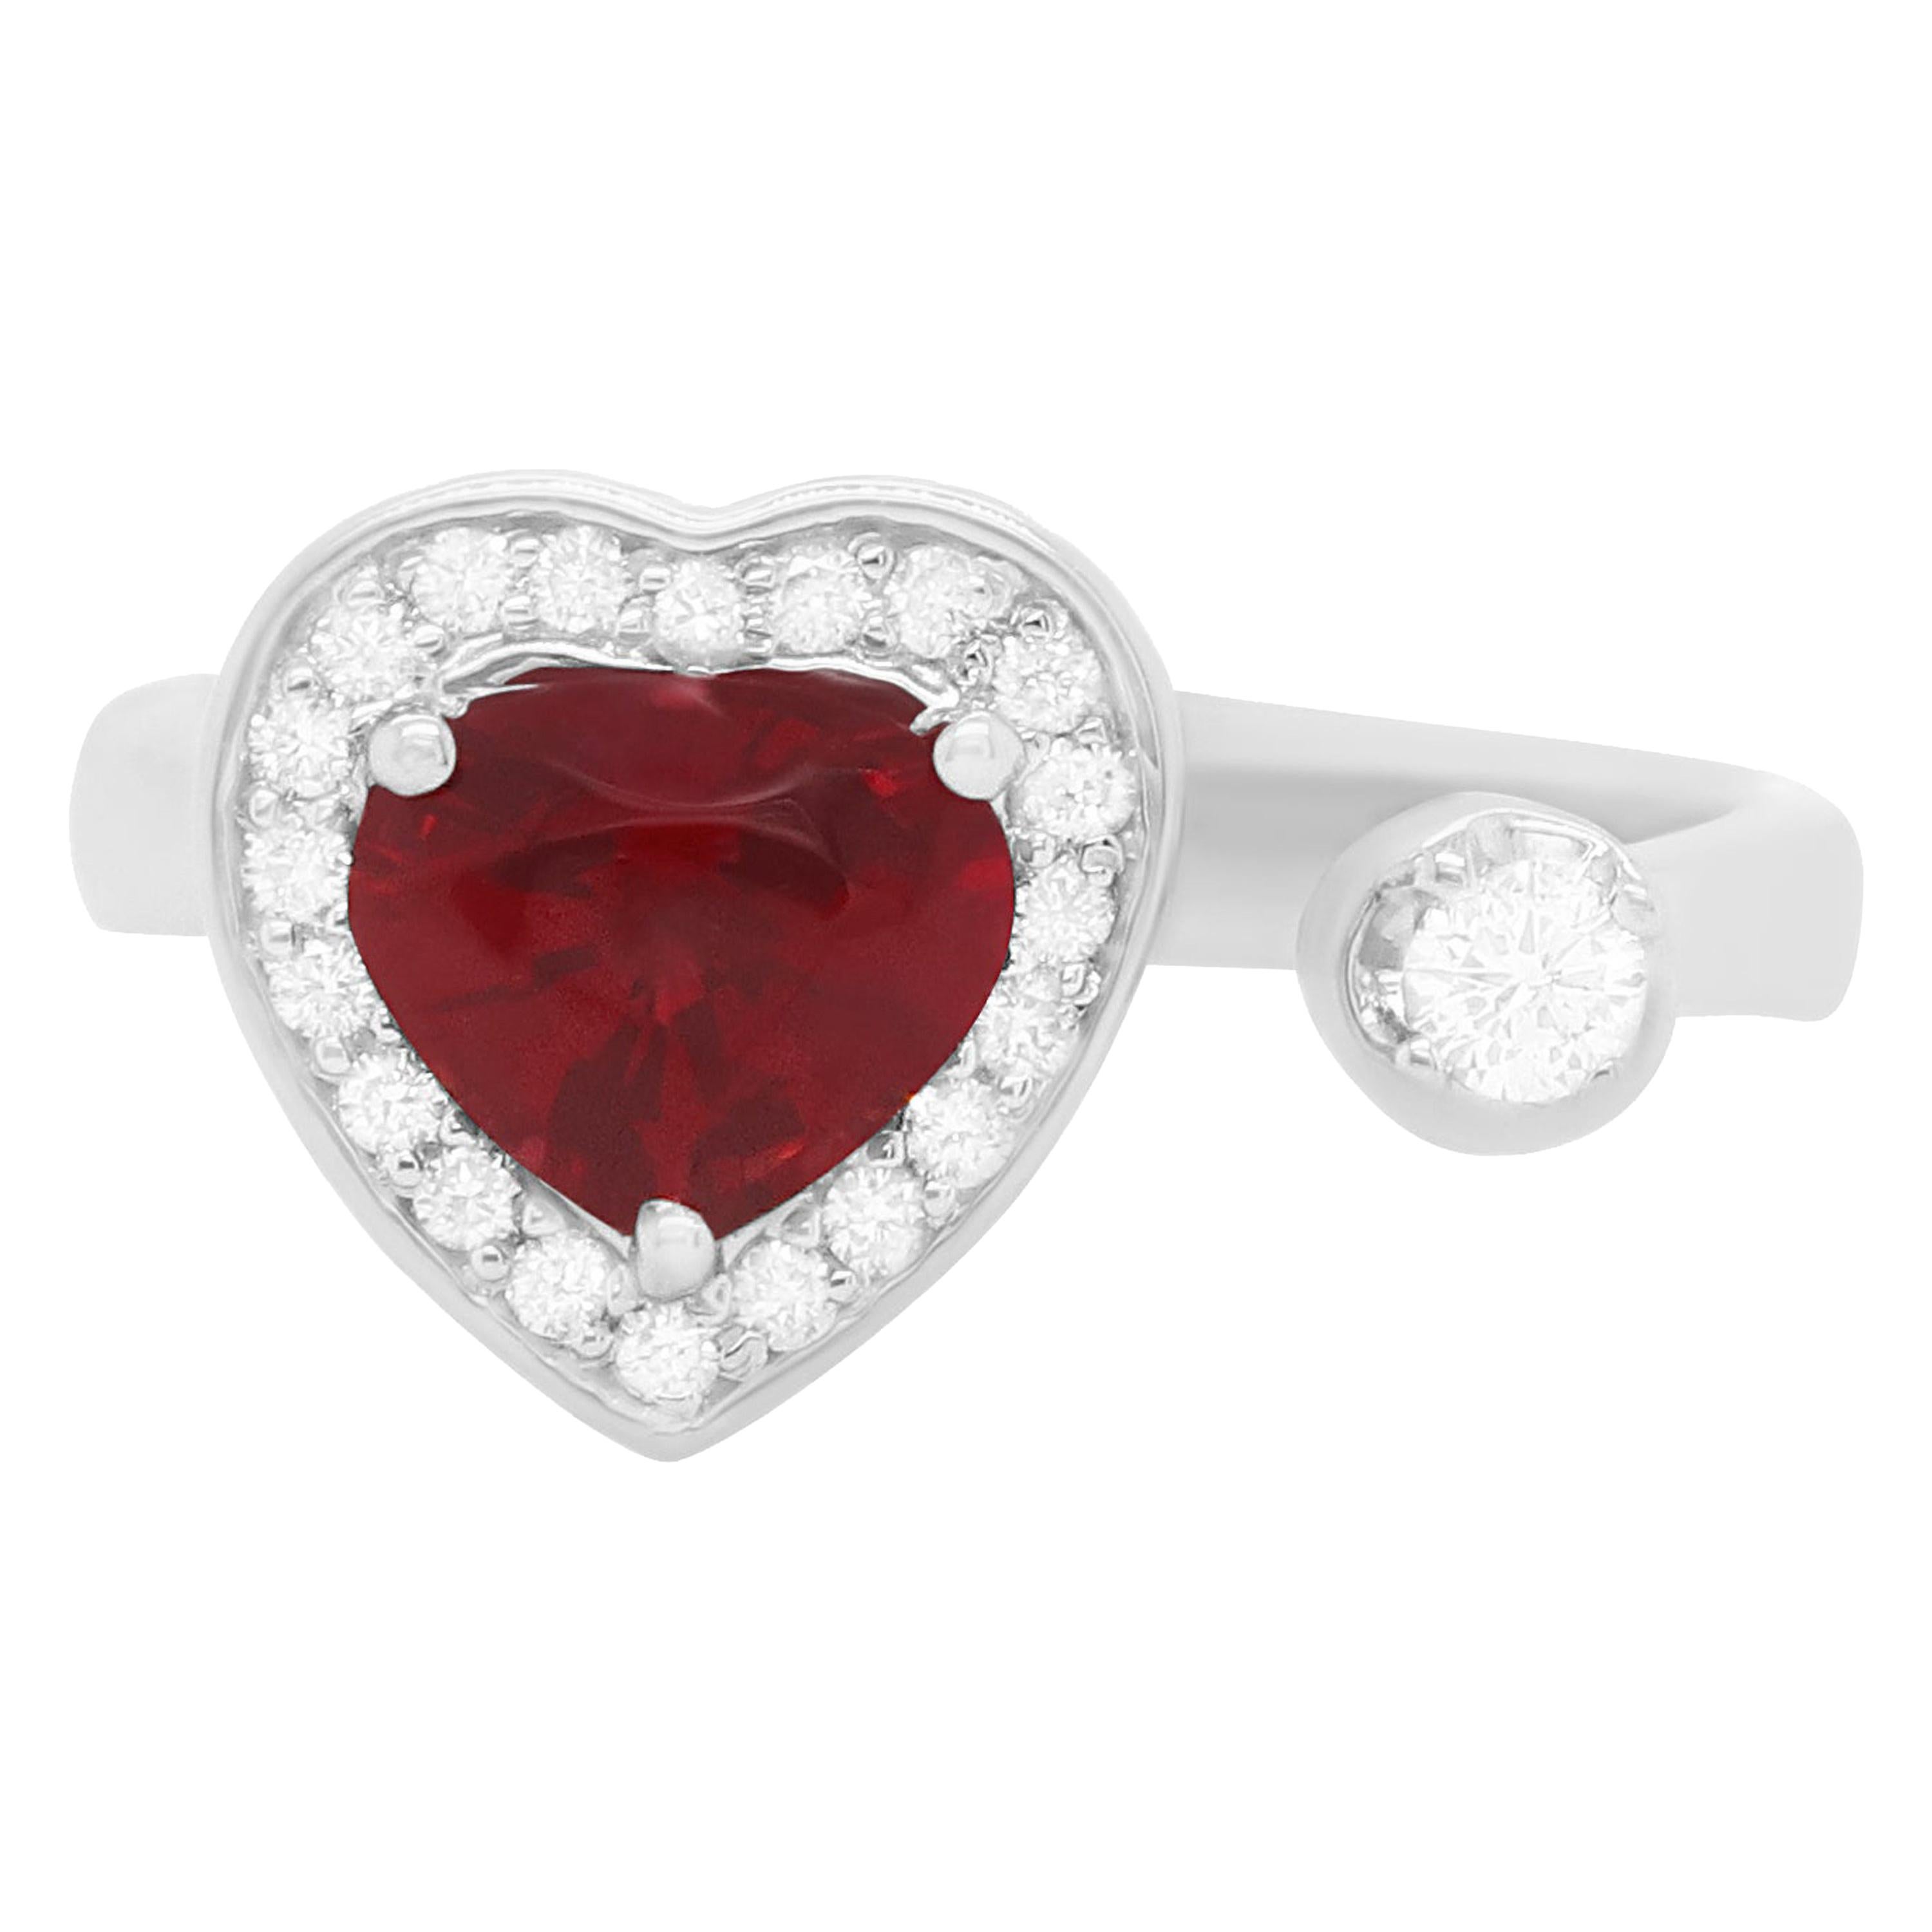 0.94 Carat Spinel and Diamond Heart Ring